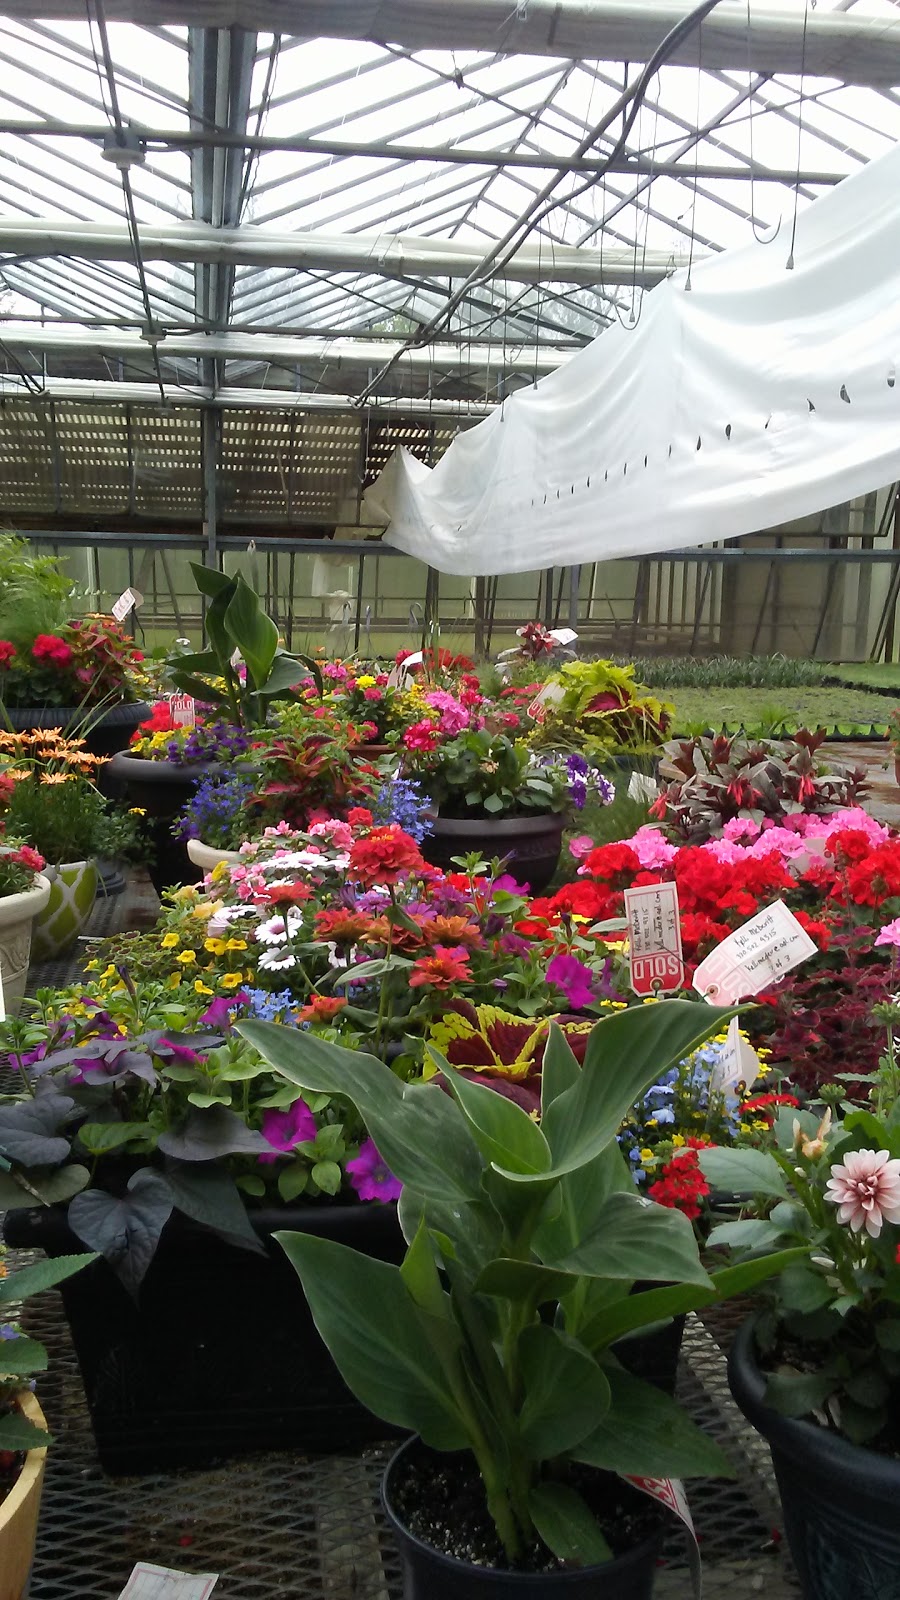 Weingartner Greenhouse | 1816 Old Butler Rd, New Castle, PA 16101, USA | Phone: (724) 992-8037